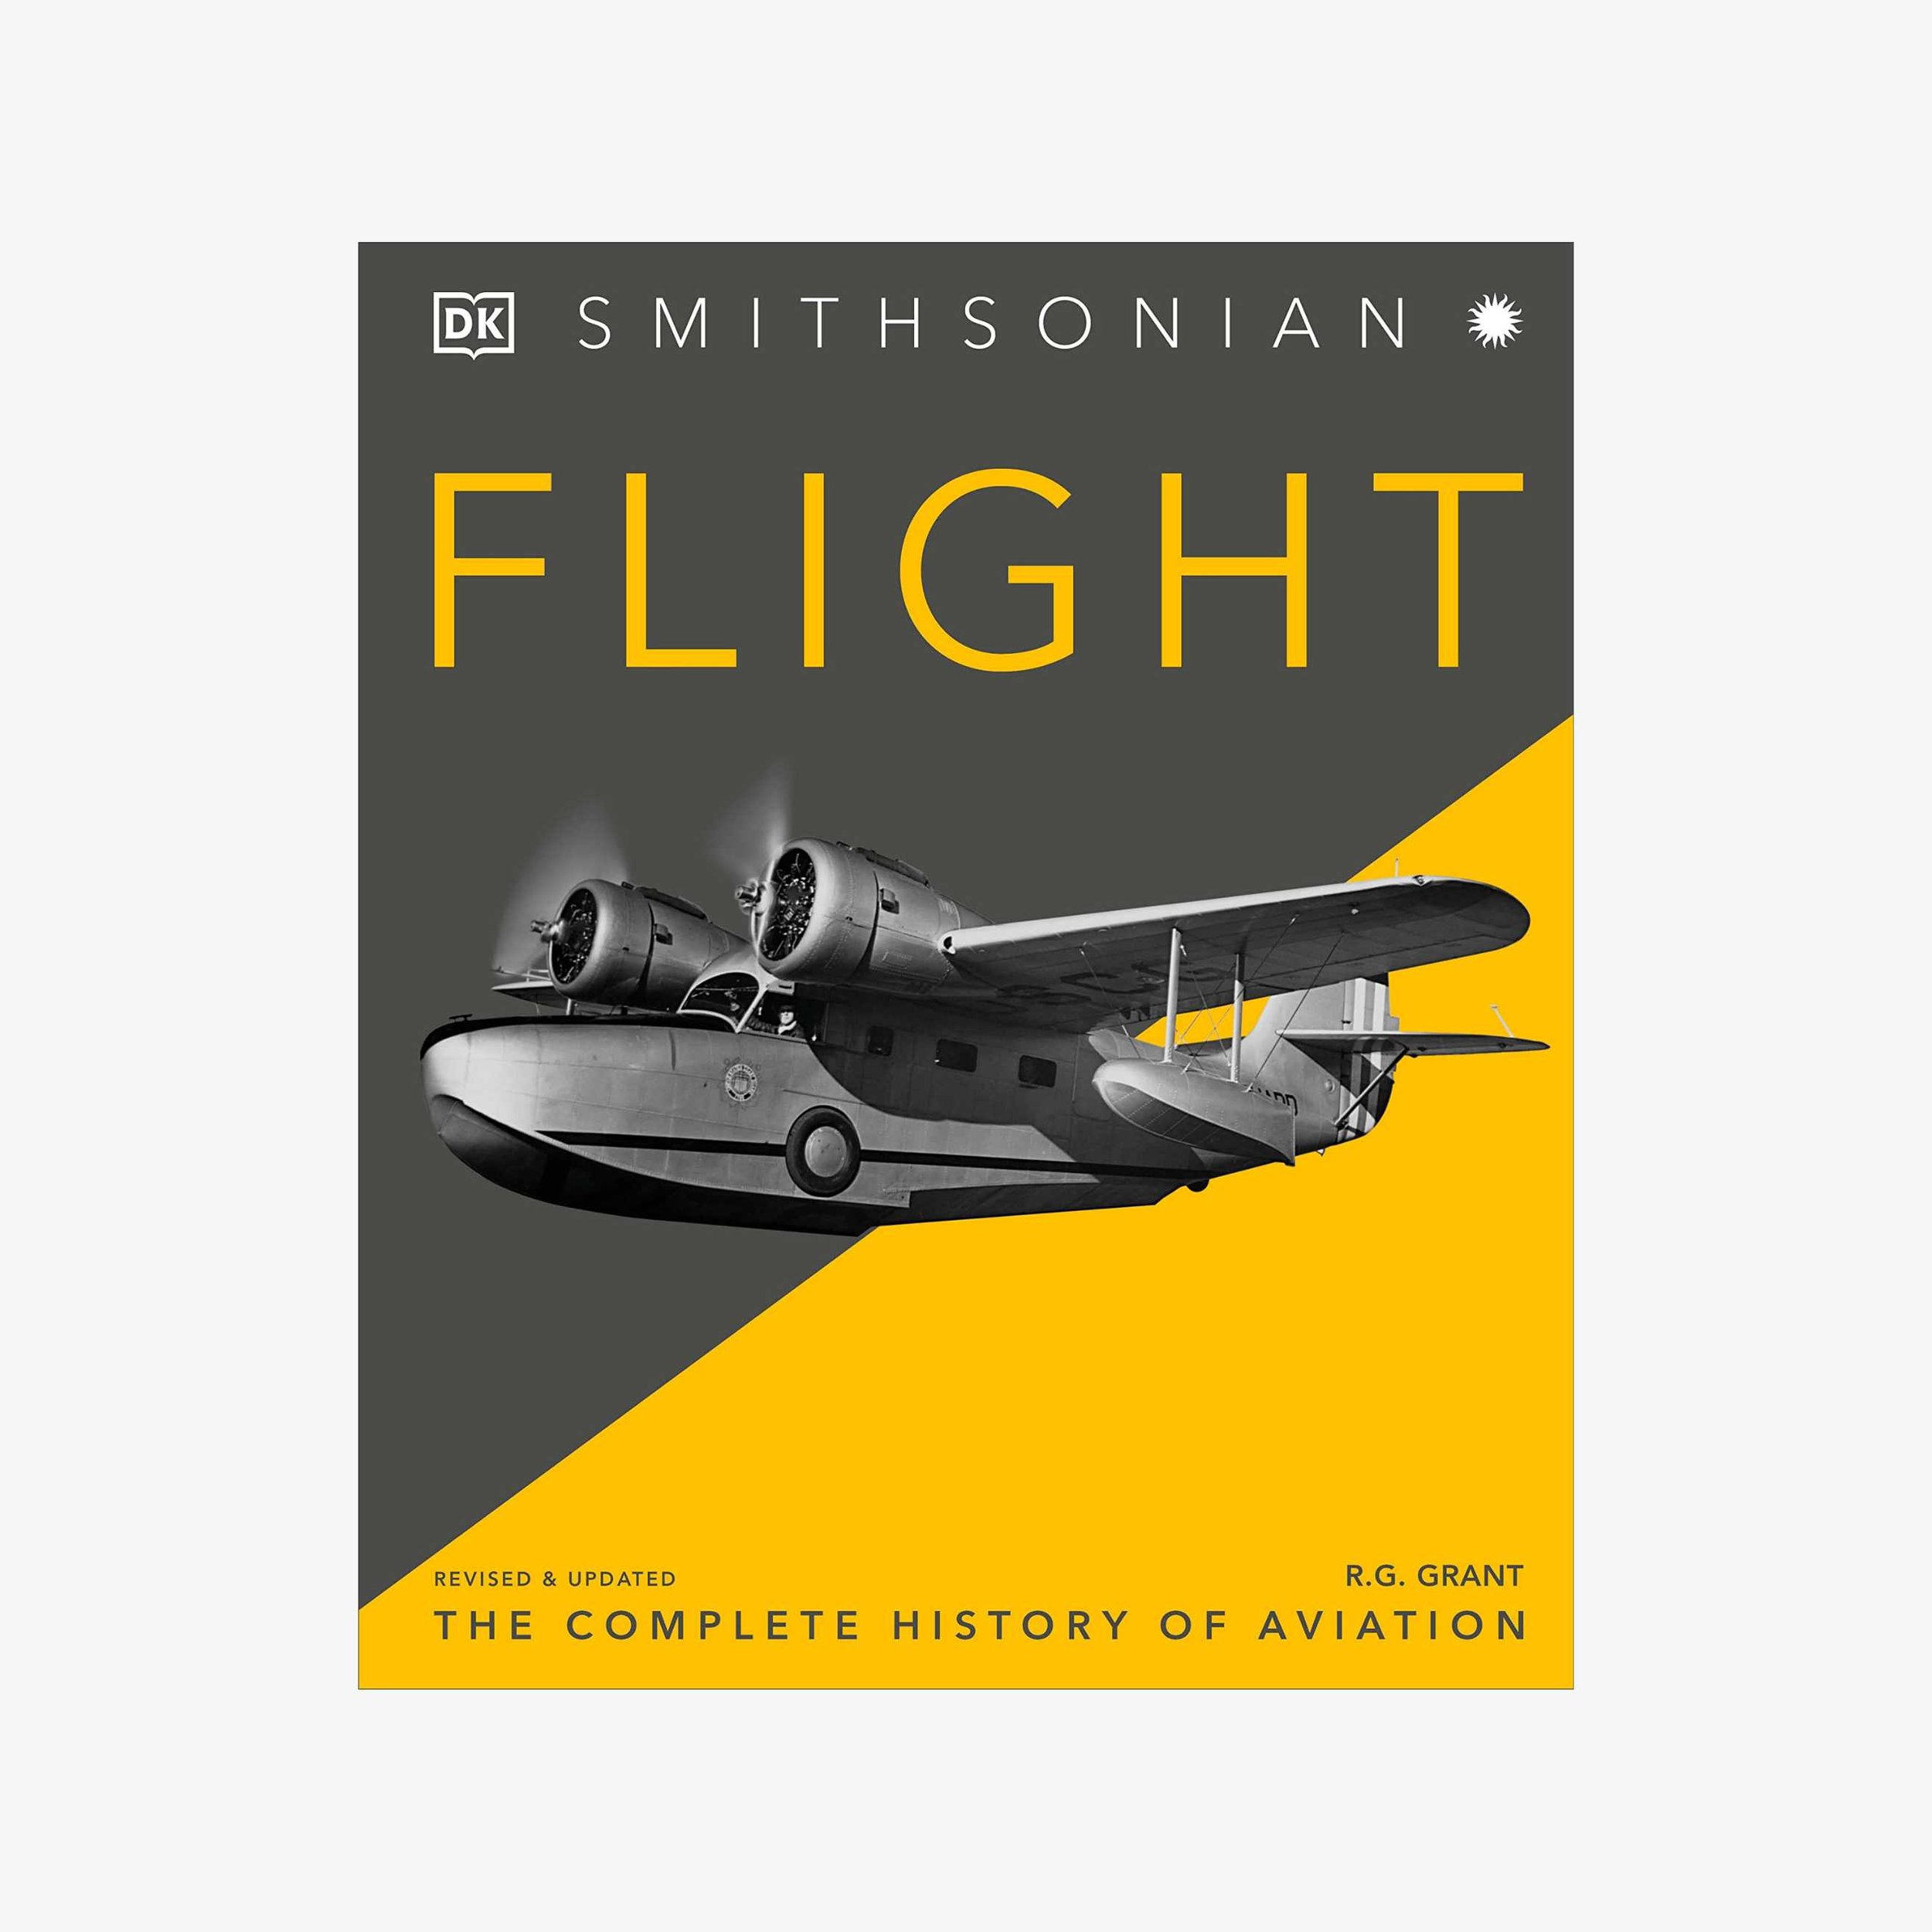 Smithsonian FLIGHT Book - The Complete History of Aviation.jpg